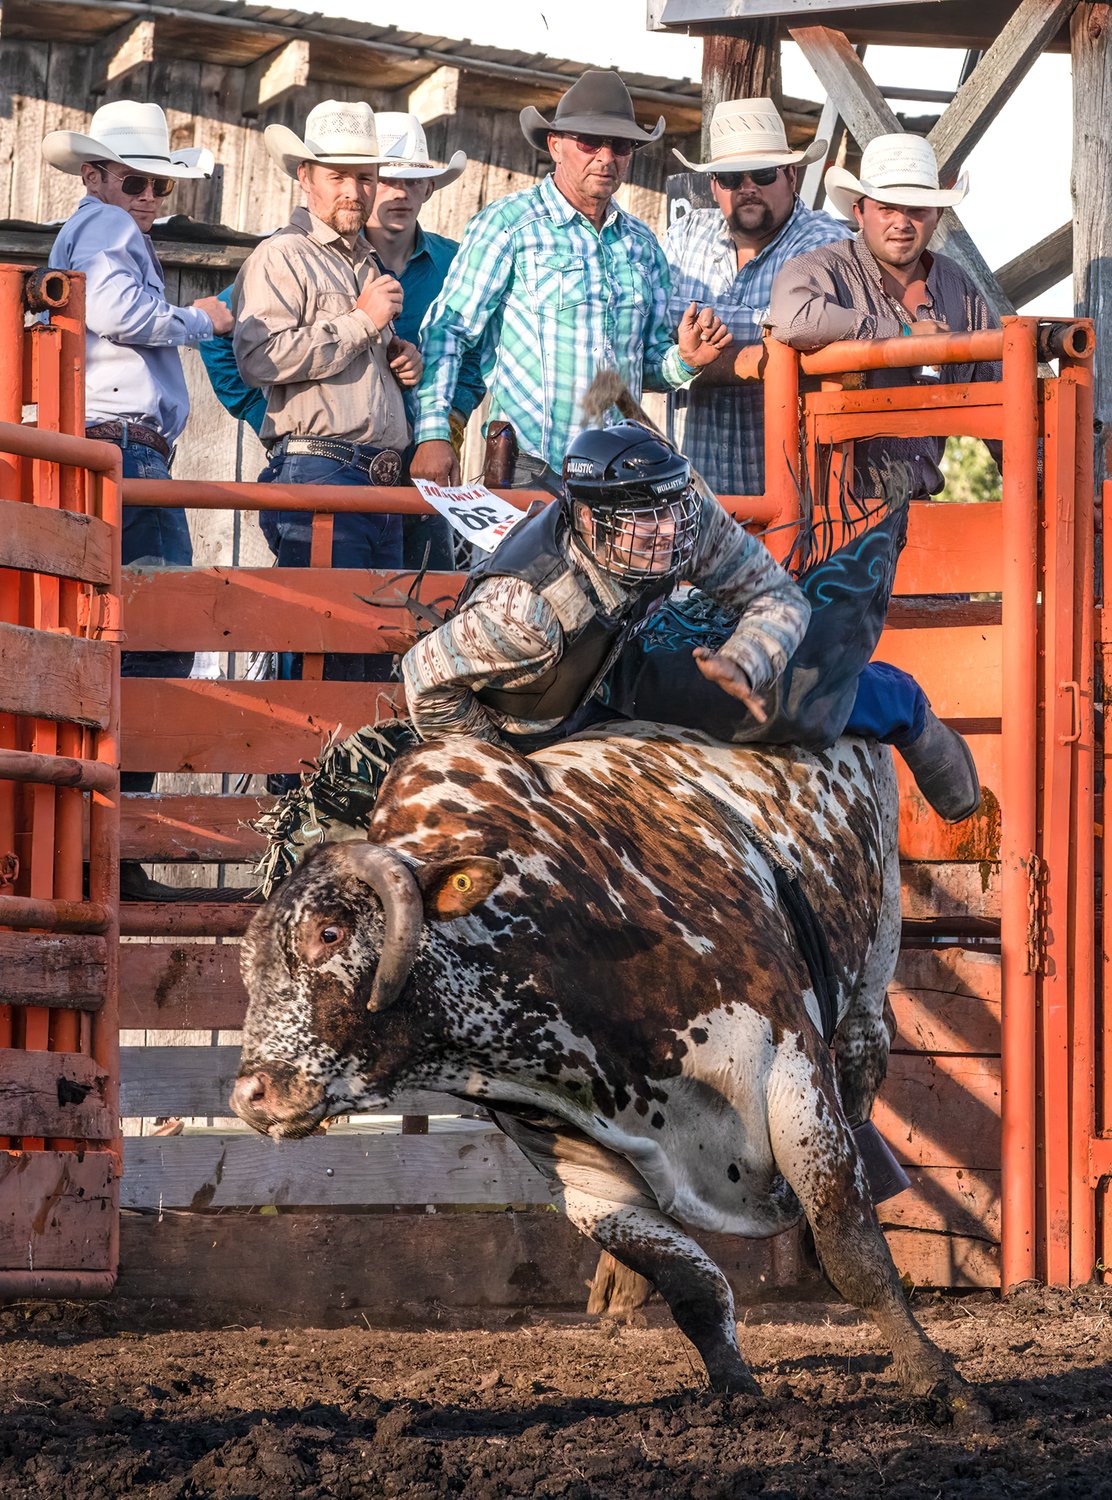 Even cowboys behind the fence look
apprehensive as a huge and angry bull 
explodes out 
of the gate leaving its rider quickly off 
balance. Score one for the bull.